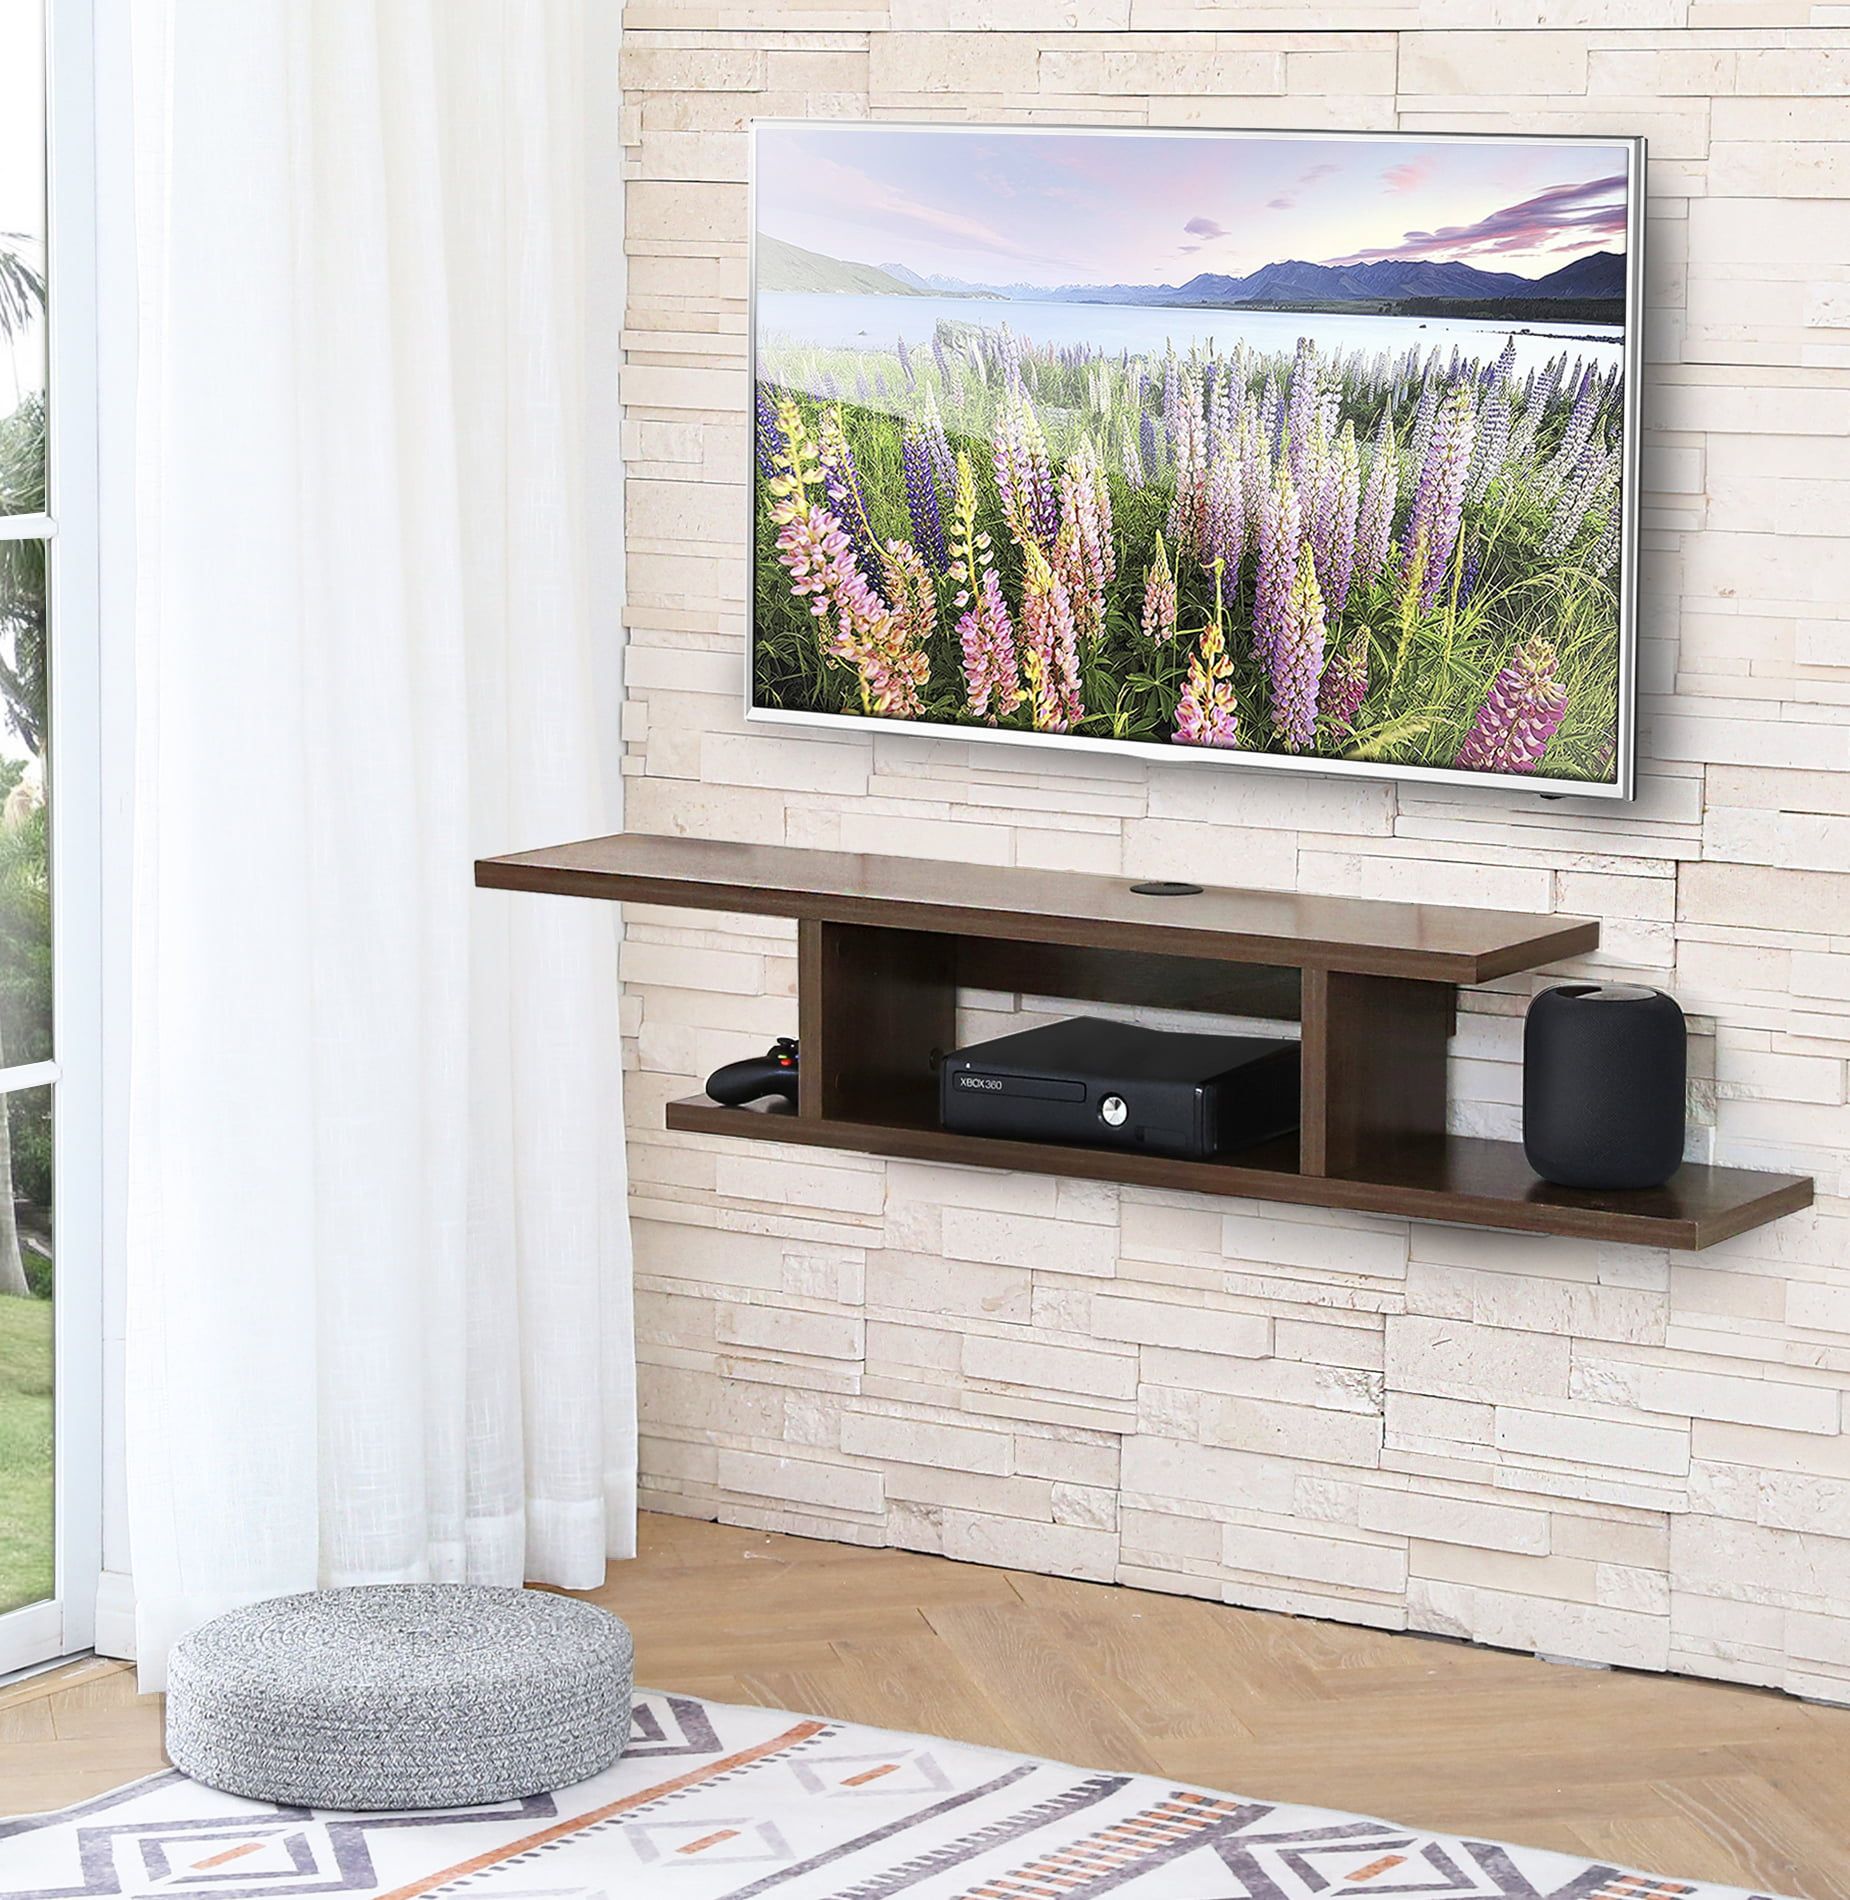 Fitueyes Floating Wall Mounted Tv Console Storage Shelf Modern Tv Stand Within Wall Mounted Floating Tv Stands (Gallery 2 of 20)